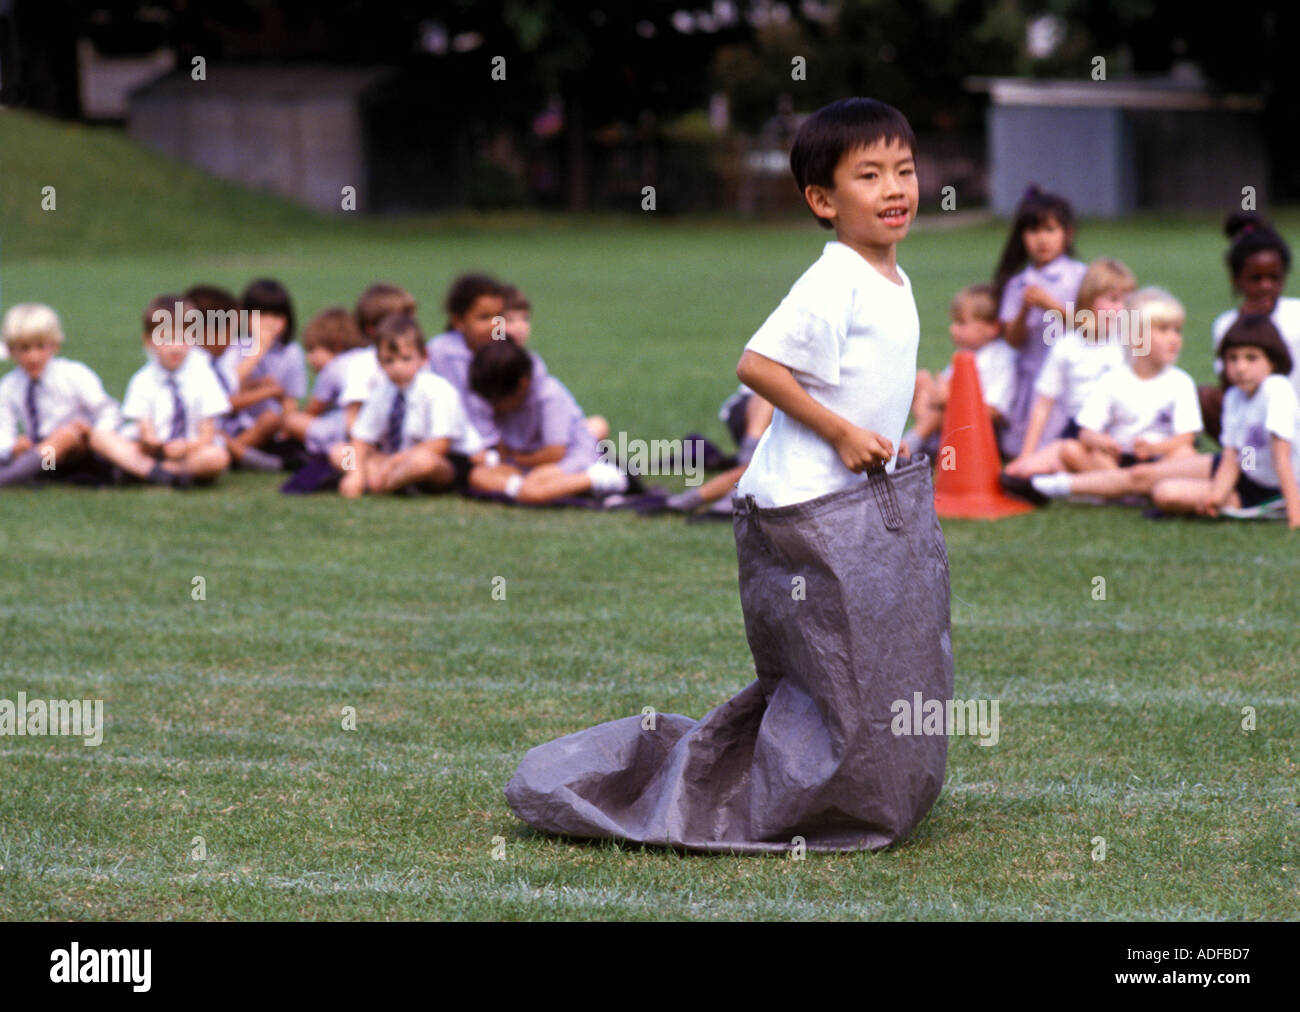 Children taking part in Sports day sack race at end of year sports day Stock Photo